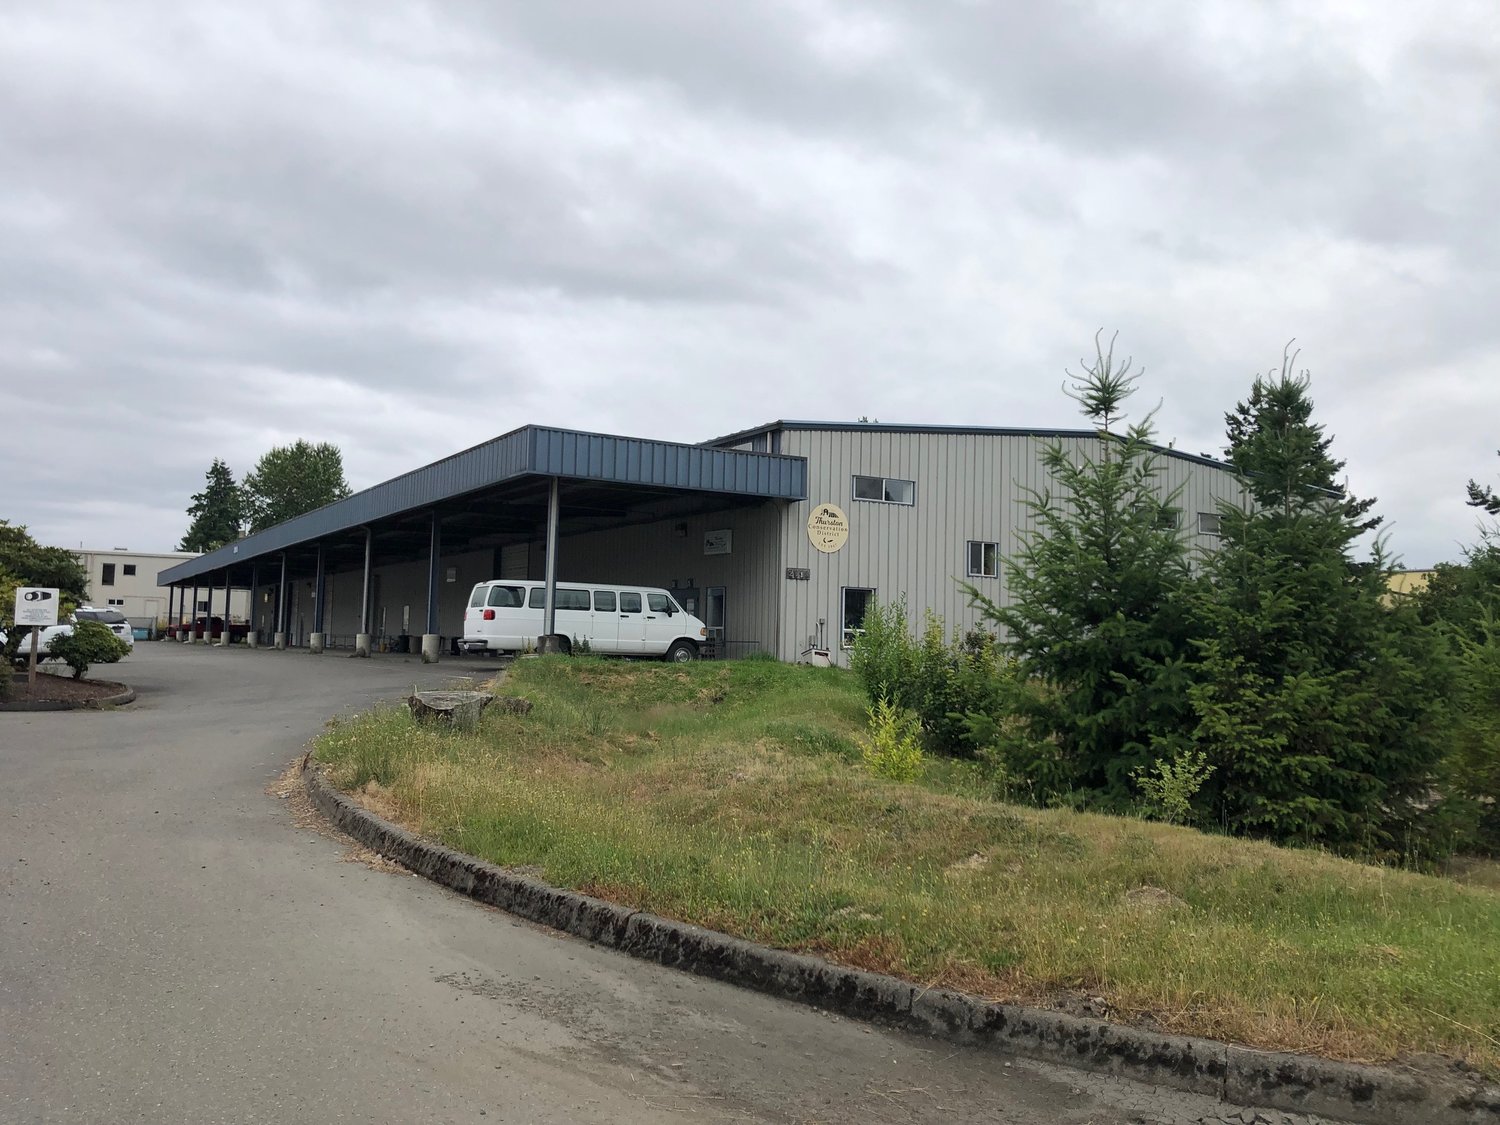 This building at 2918 Ferguson St. SW in Tumwater was authorized to be purchased by Thurston County is part of the three-building deal approved on June 29, 2021.